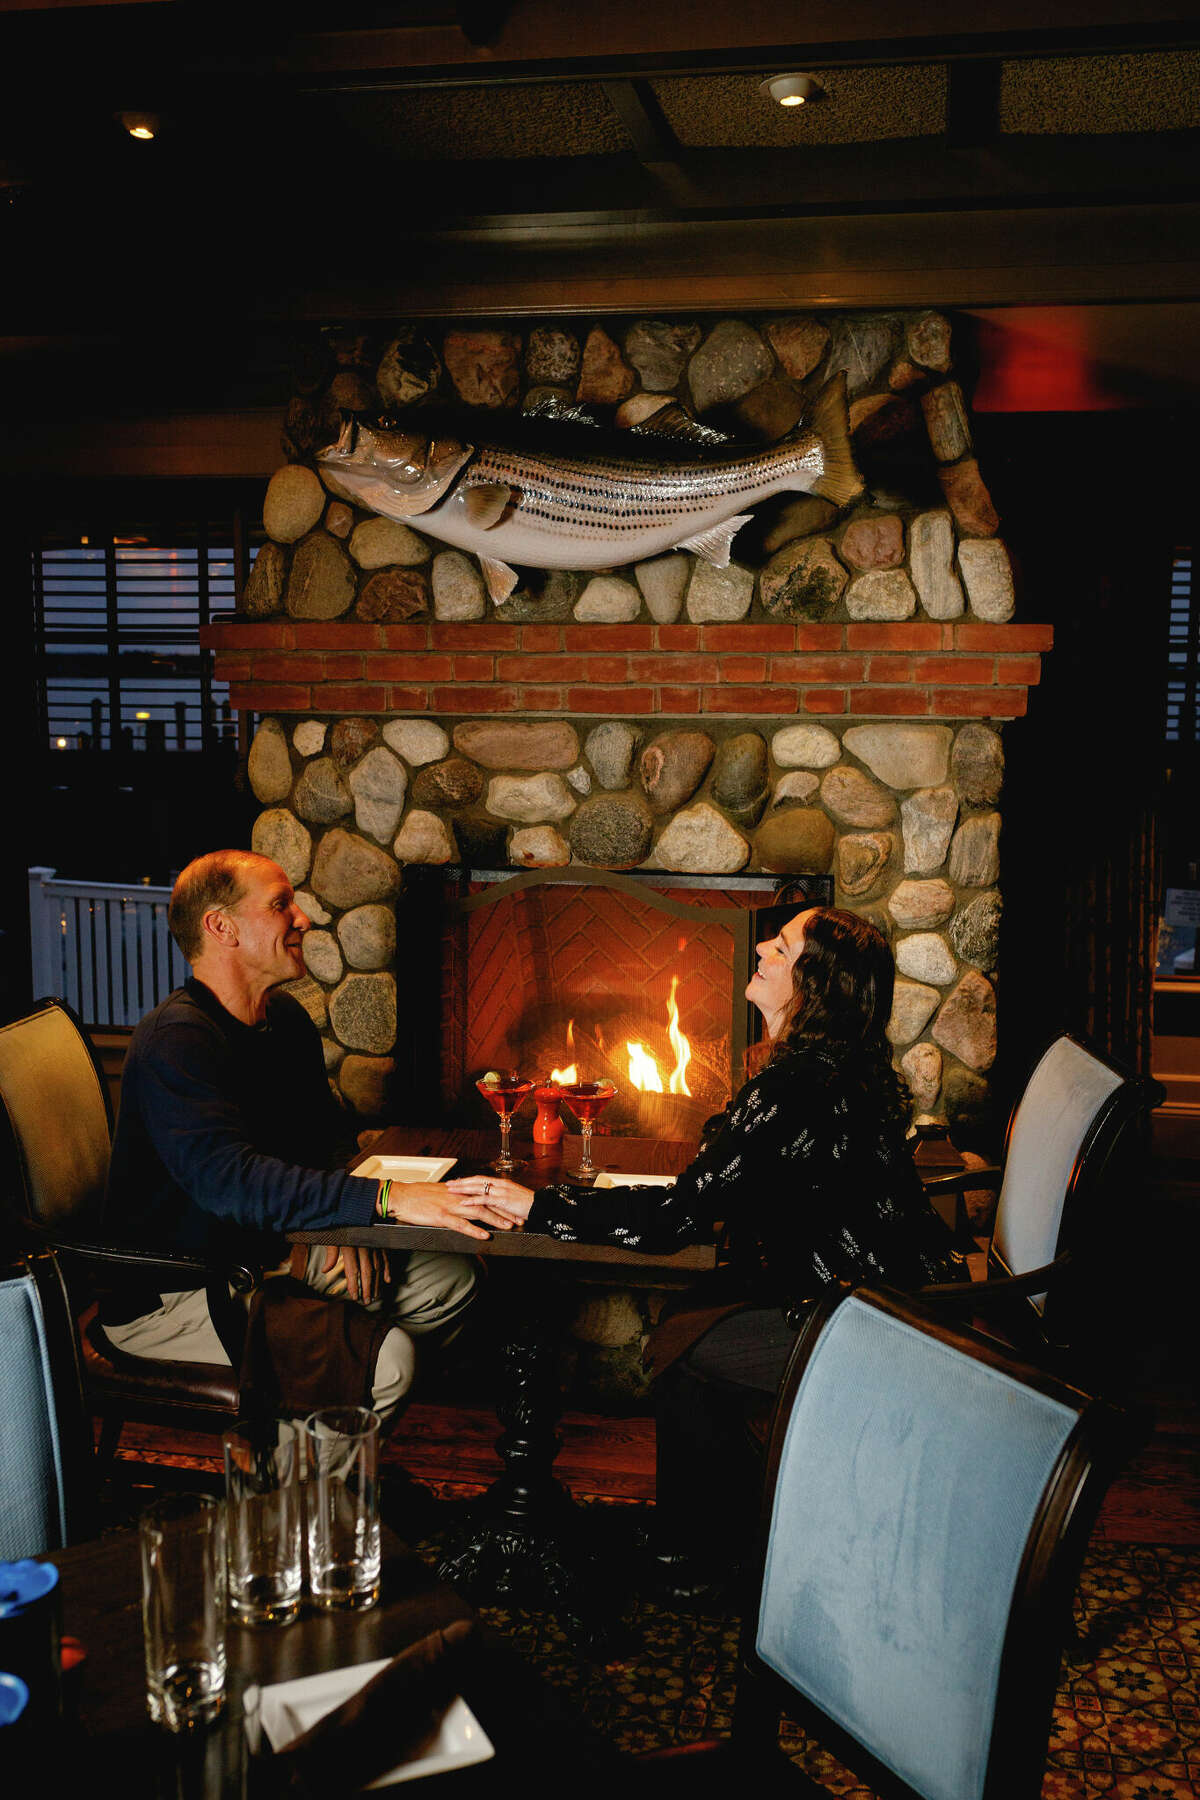 A couple eating and laughing in front of a lit stone fireplace in a cozy restaurant setting